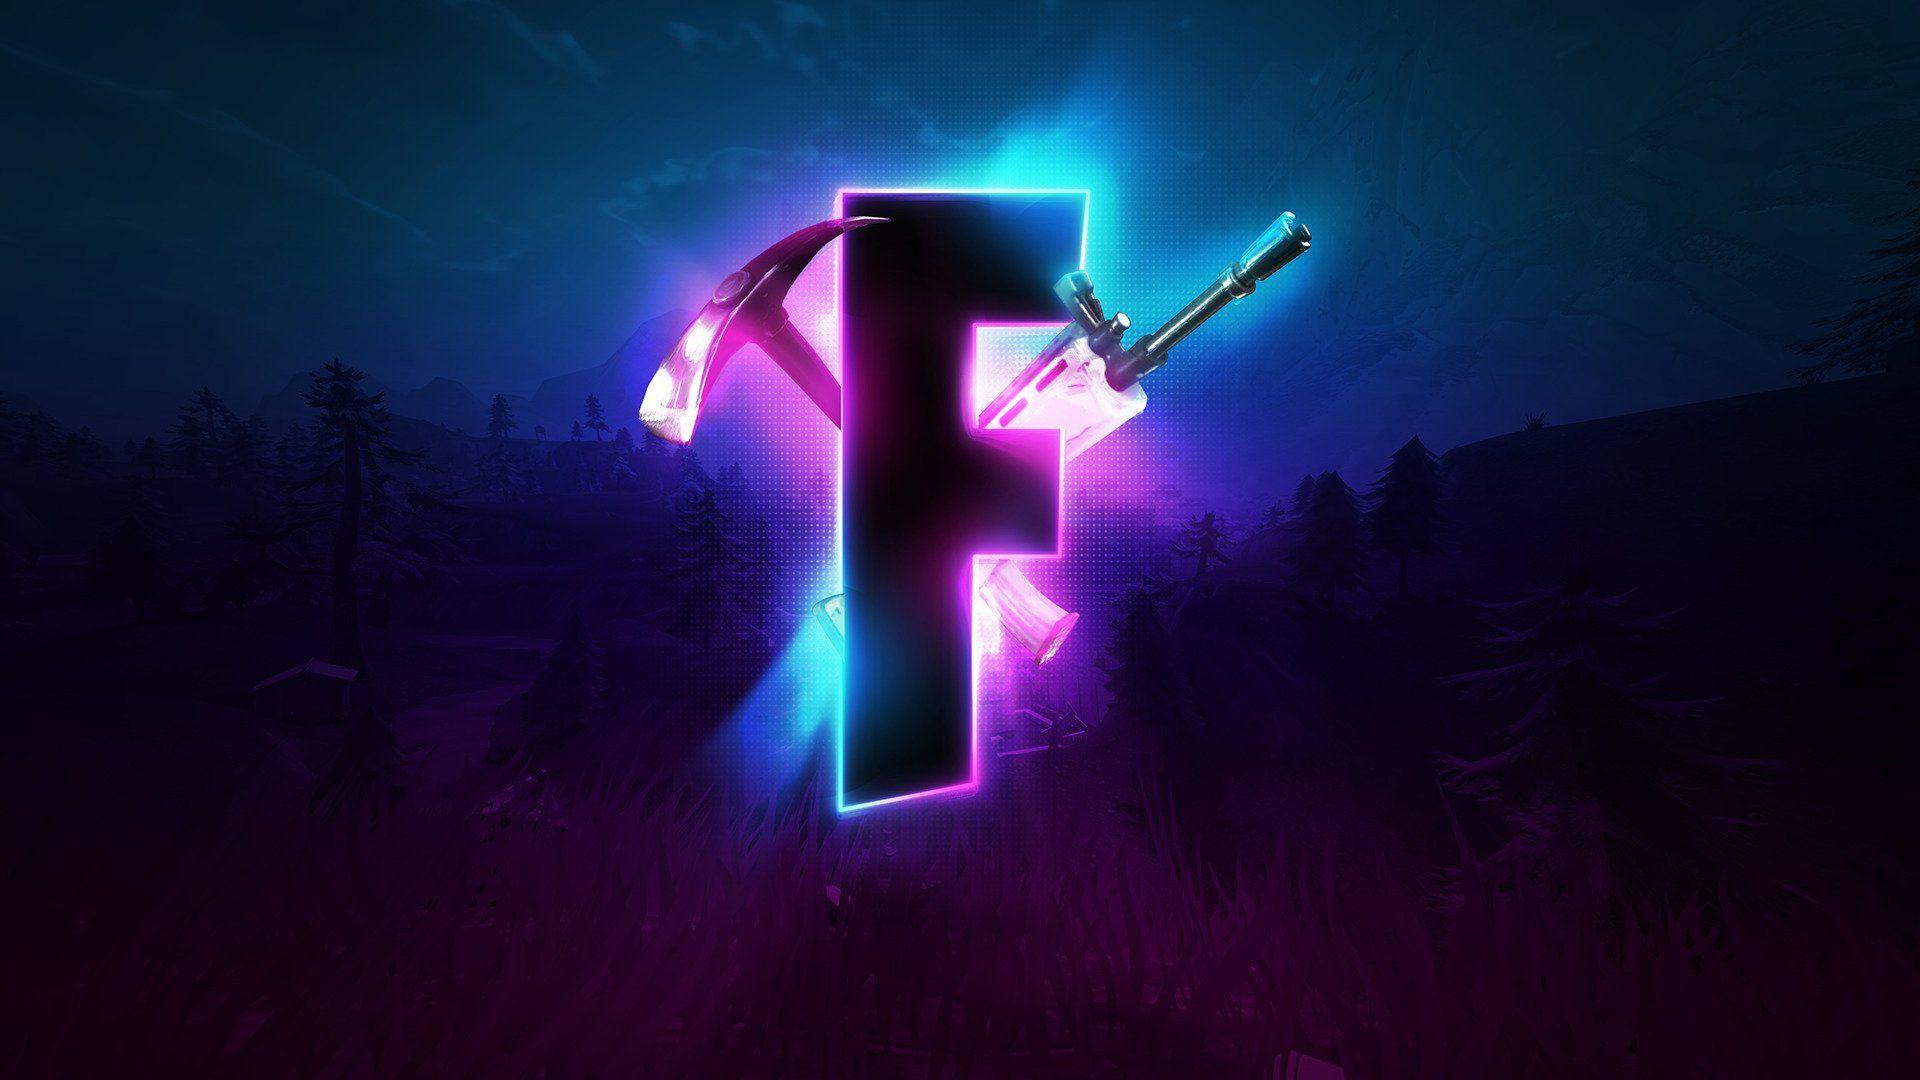 F stands for Fortnite by Noah Stephenson Wallpaper and Free